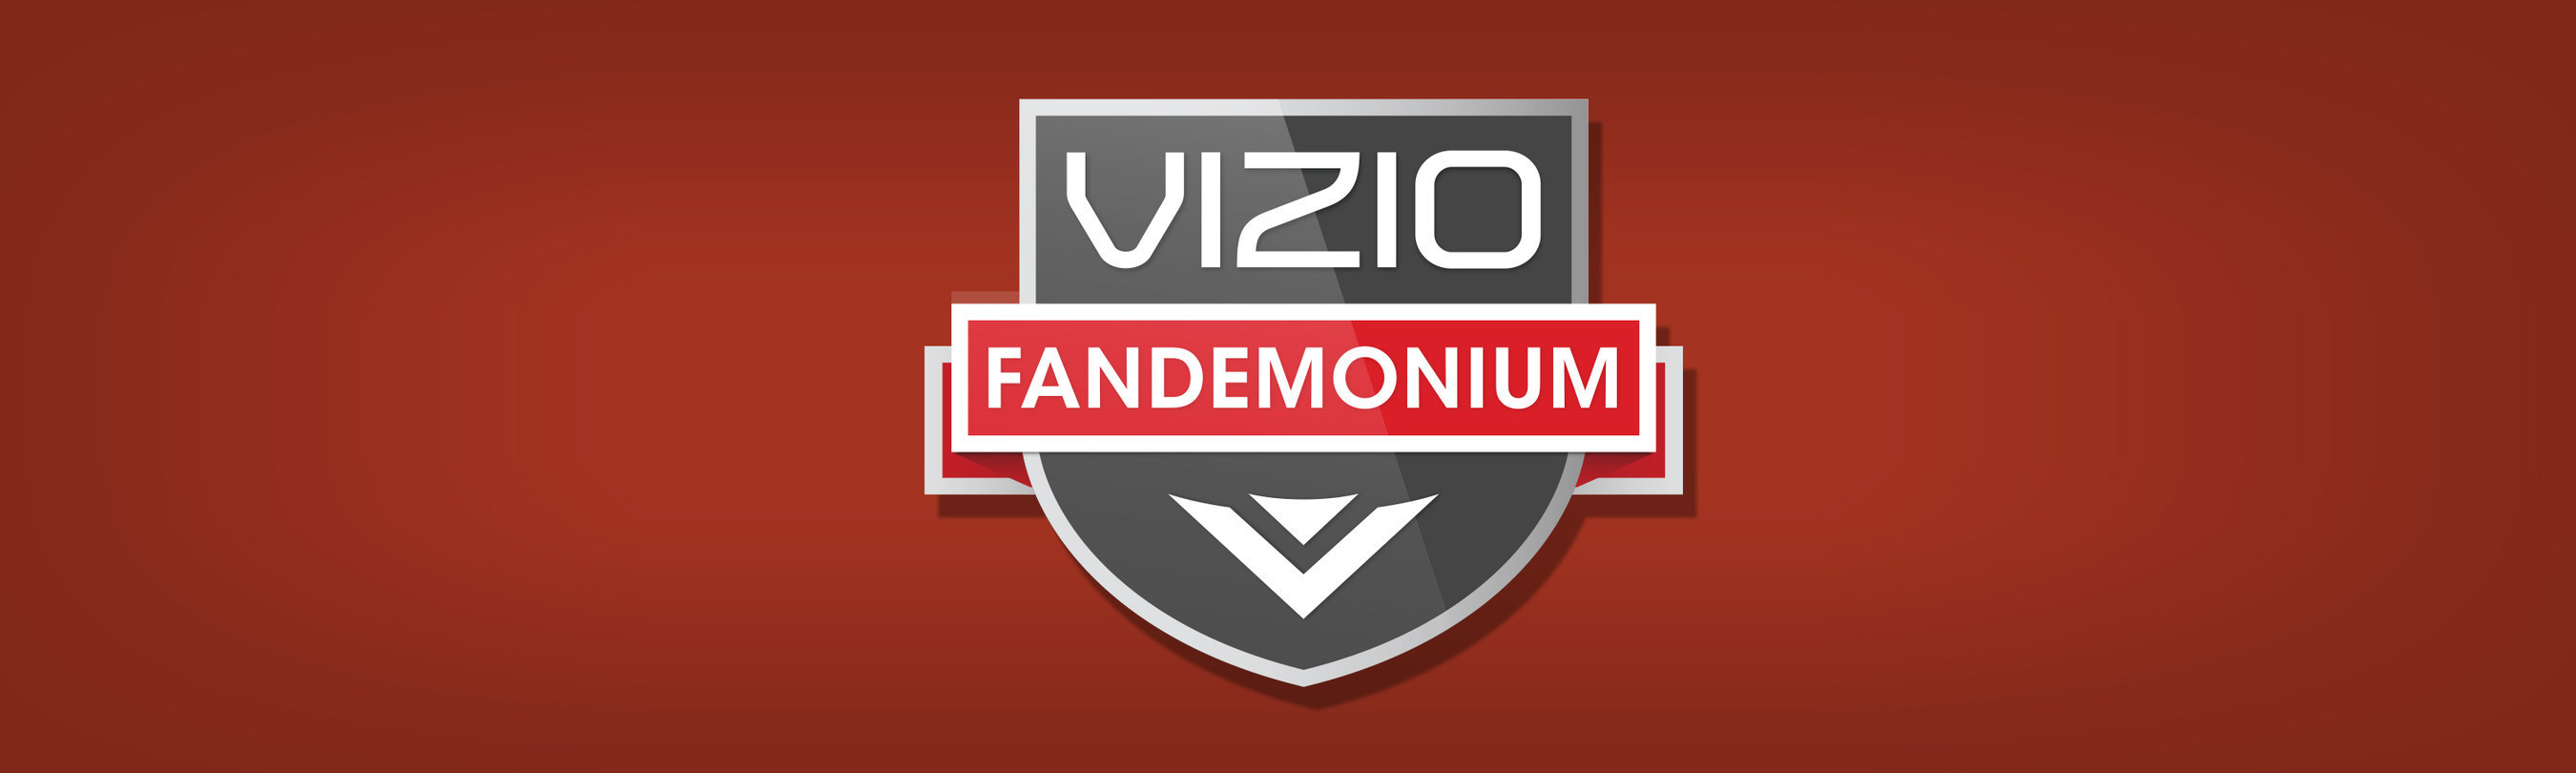 VIZIO LAUNCHES UPDATED FANDEMONIUM ONLINE FAN ZONE COMMUNITY, PROVIDING FANS WITH EVEN MORE ENGAGING, INTERACTIVE EXPERIENCES